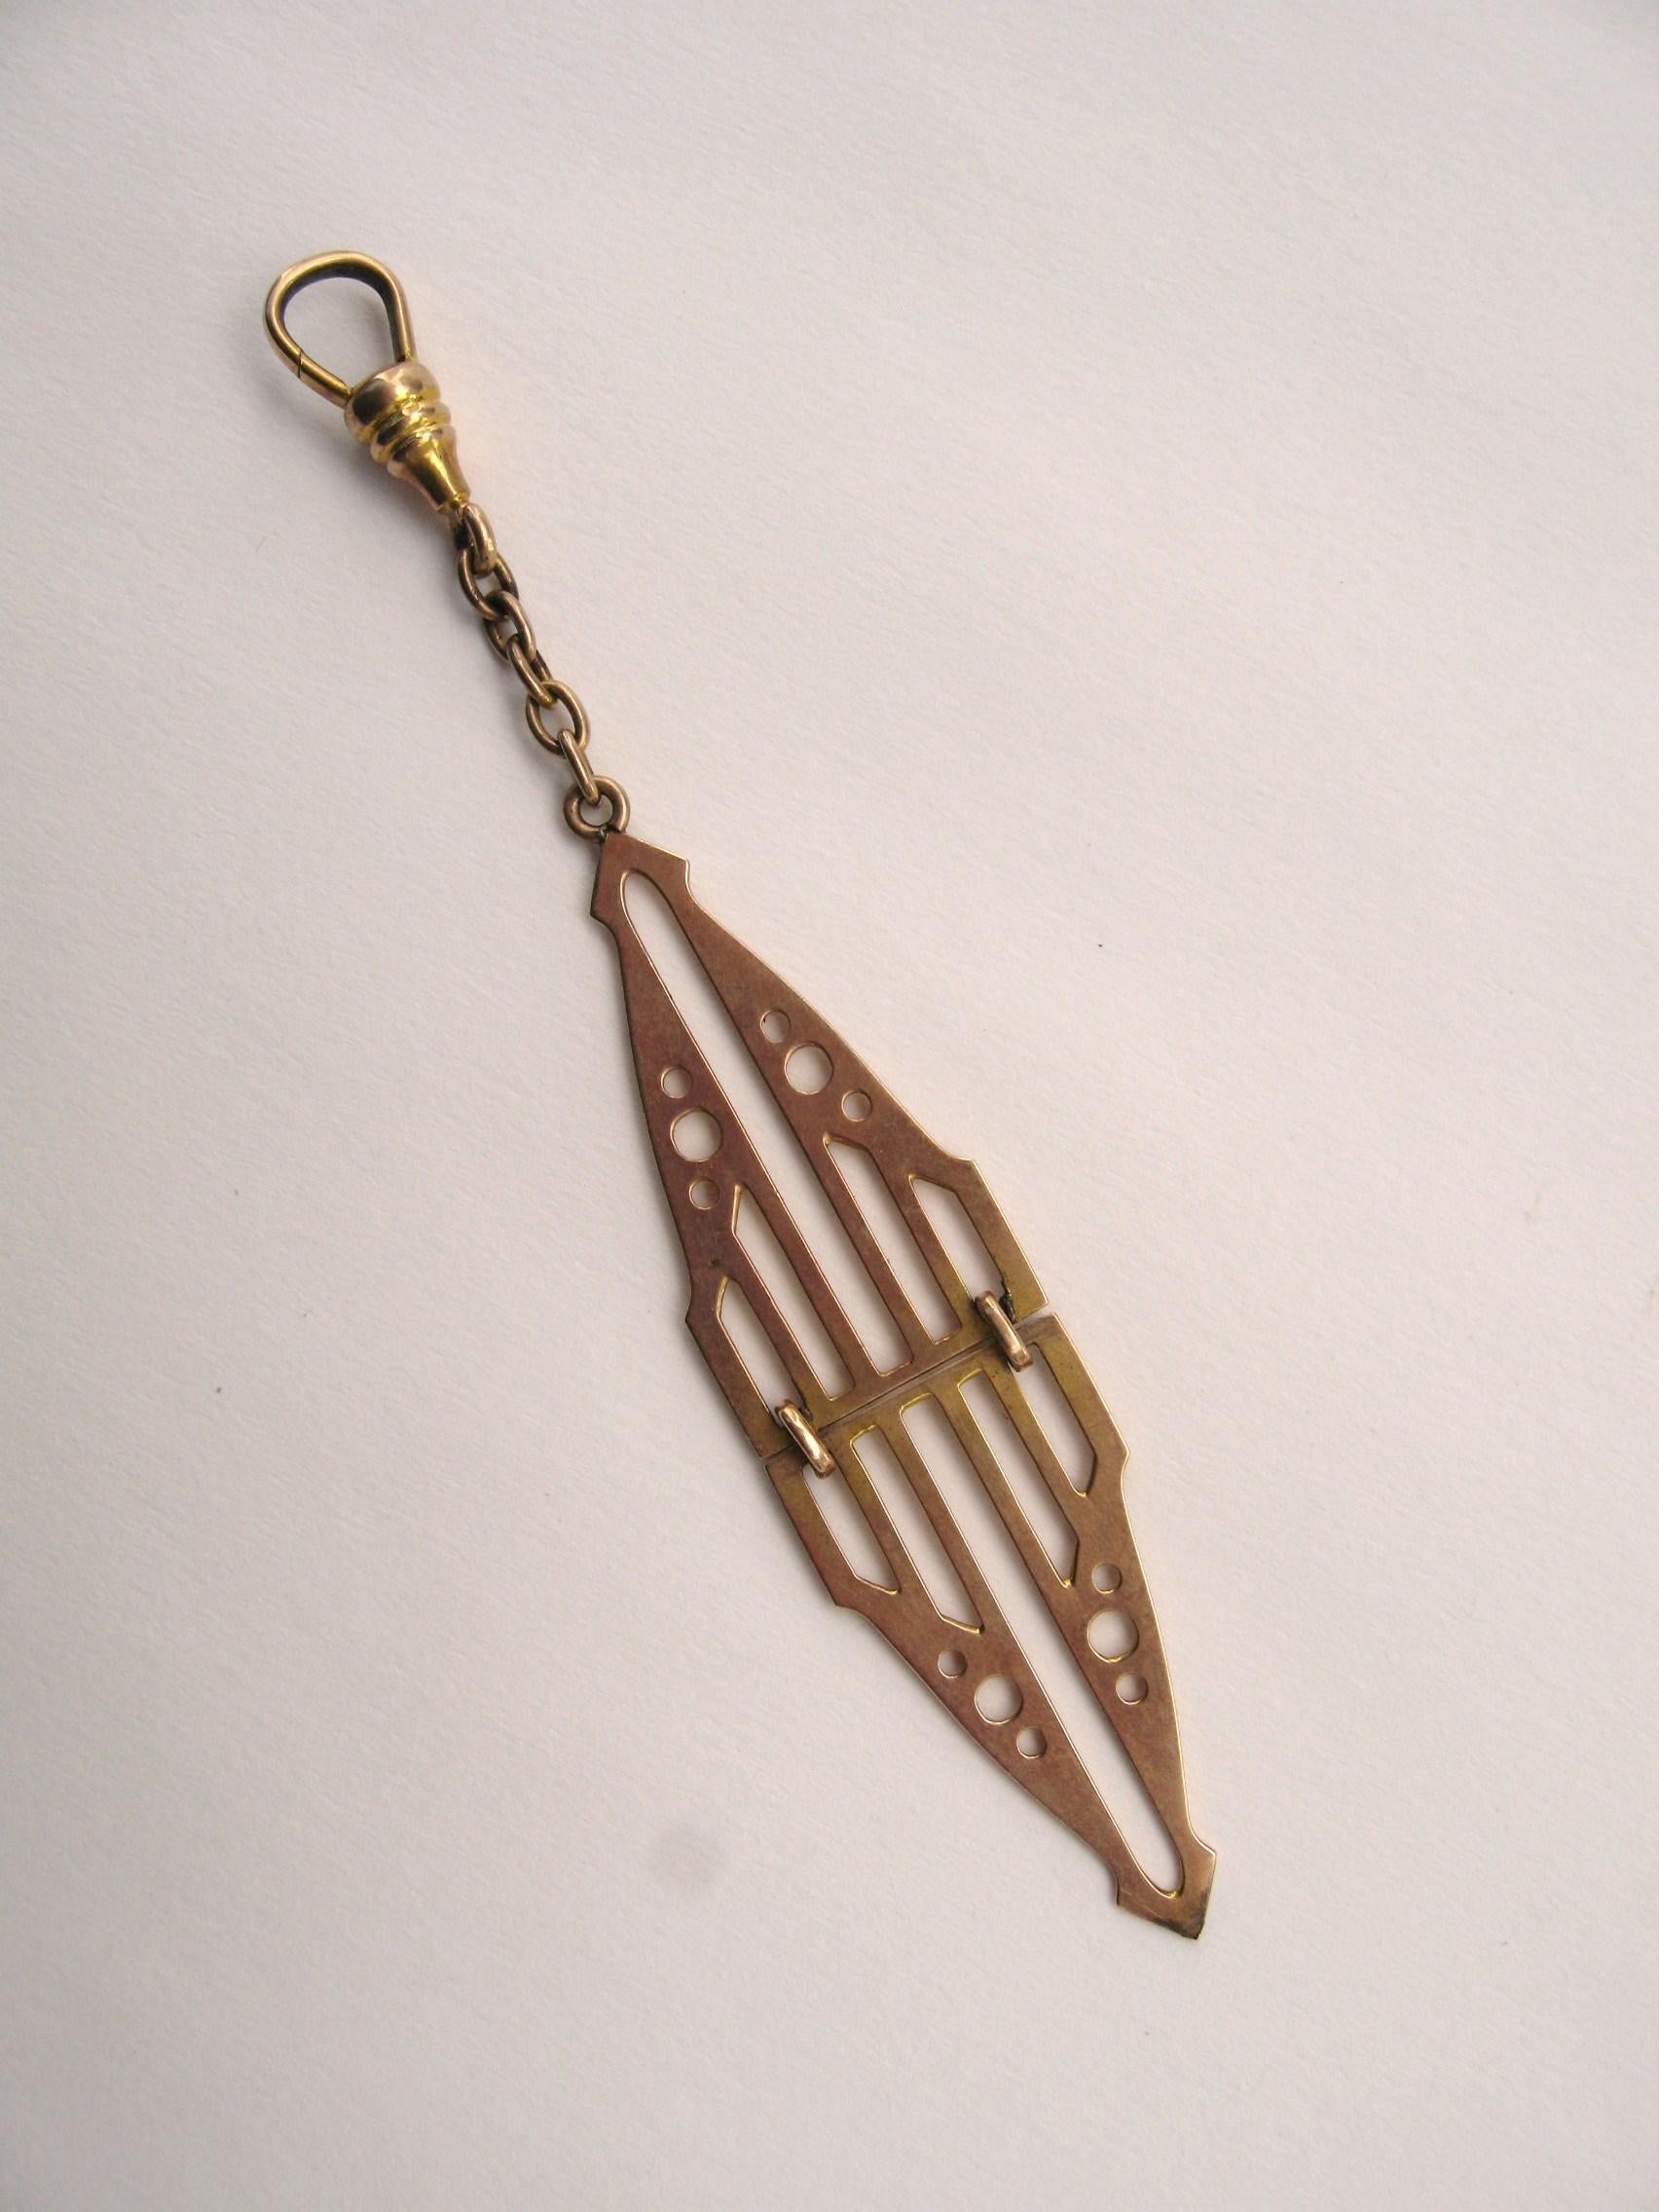 Fabulous early Rose Gold Folding Watch chain. Measuring 3.8 x .65. This would look amazing added to a chain to wear as a pendant. This is out of a massive collection of Contemporary designer & Vintage clothing as well as Hopi, Zuni, Navajo,